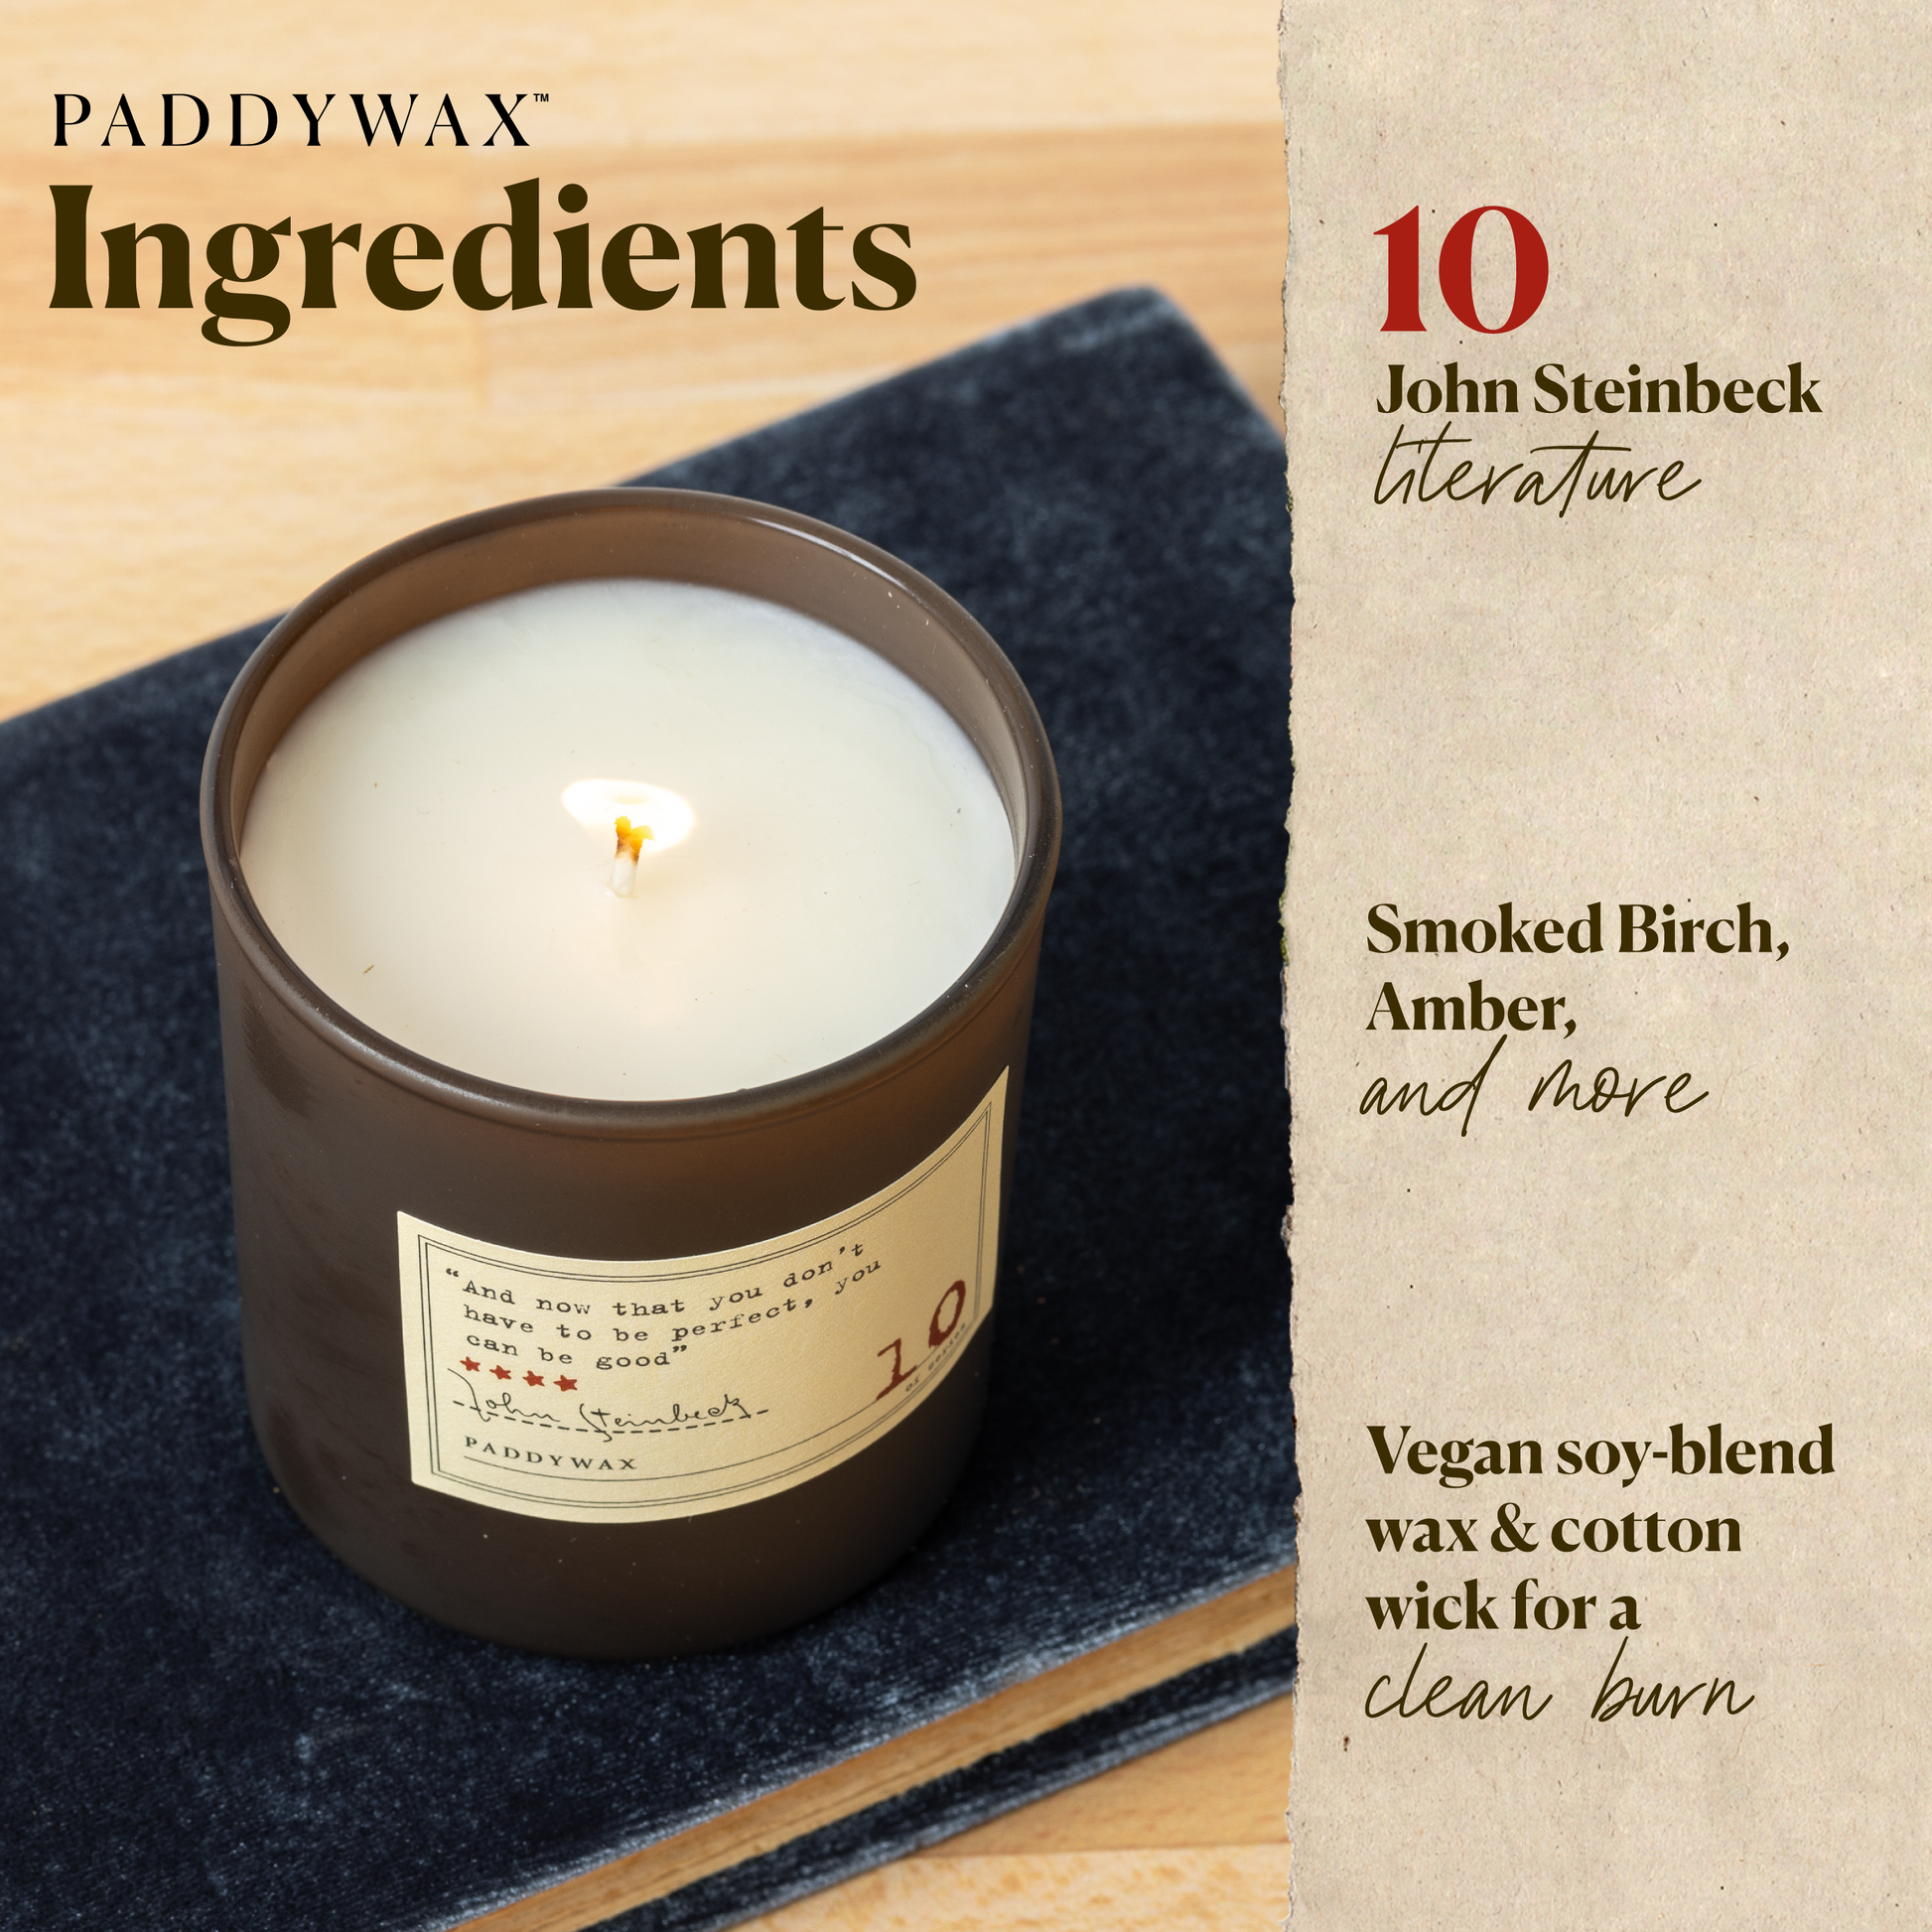 Photo of the John Steinbeck Library candle with a list of ingredients. Smoked birch, amber, and more. Vegan soy blend wax and cotton wick for a clean burn.